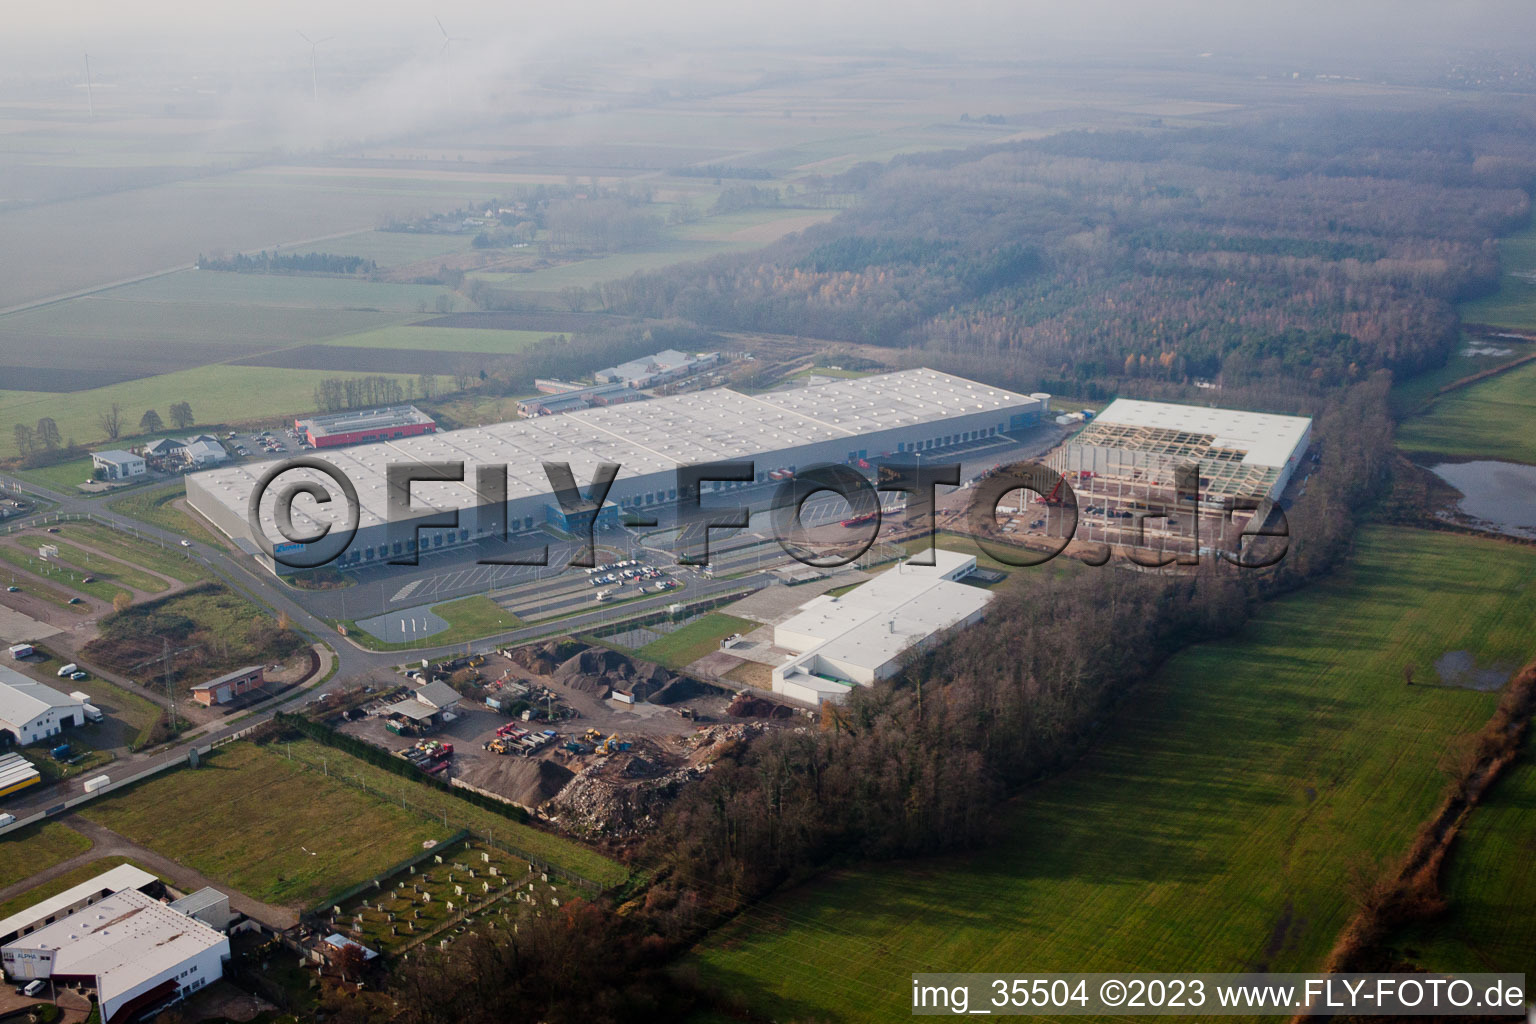 Aerial view of Commercial area, Gazely Logistics Center 2nd construction phase in the district Minderslachen in Kandel in the state Rhineland-Palatinate, Germany